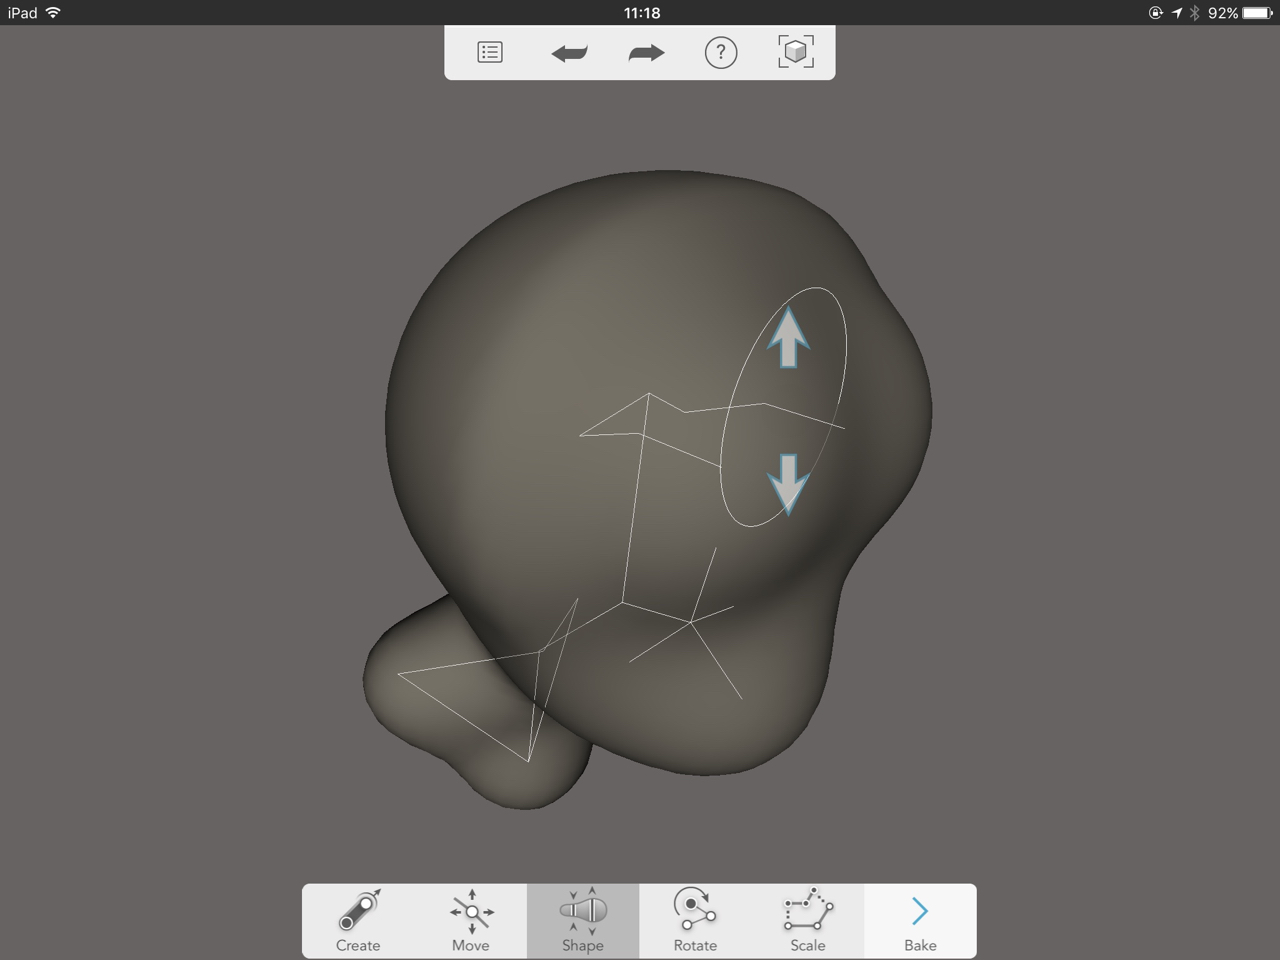  Manipulating the shape by dragging points in Autodesk Sculpt+ 